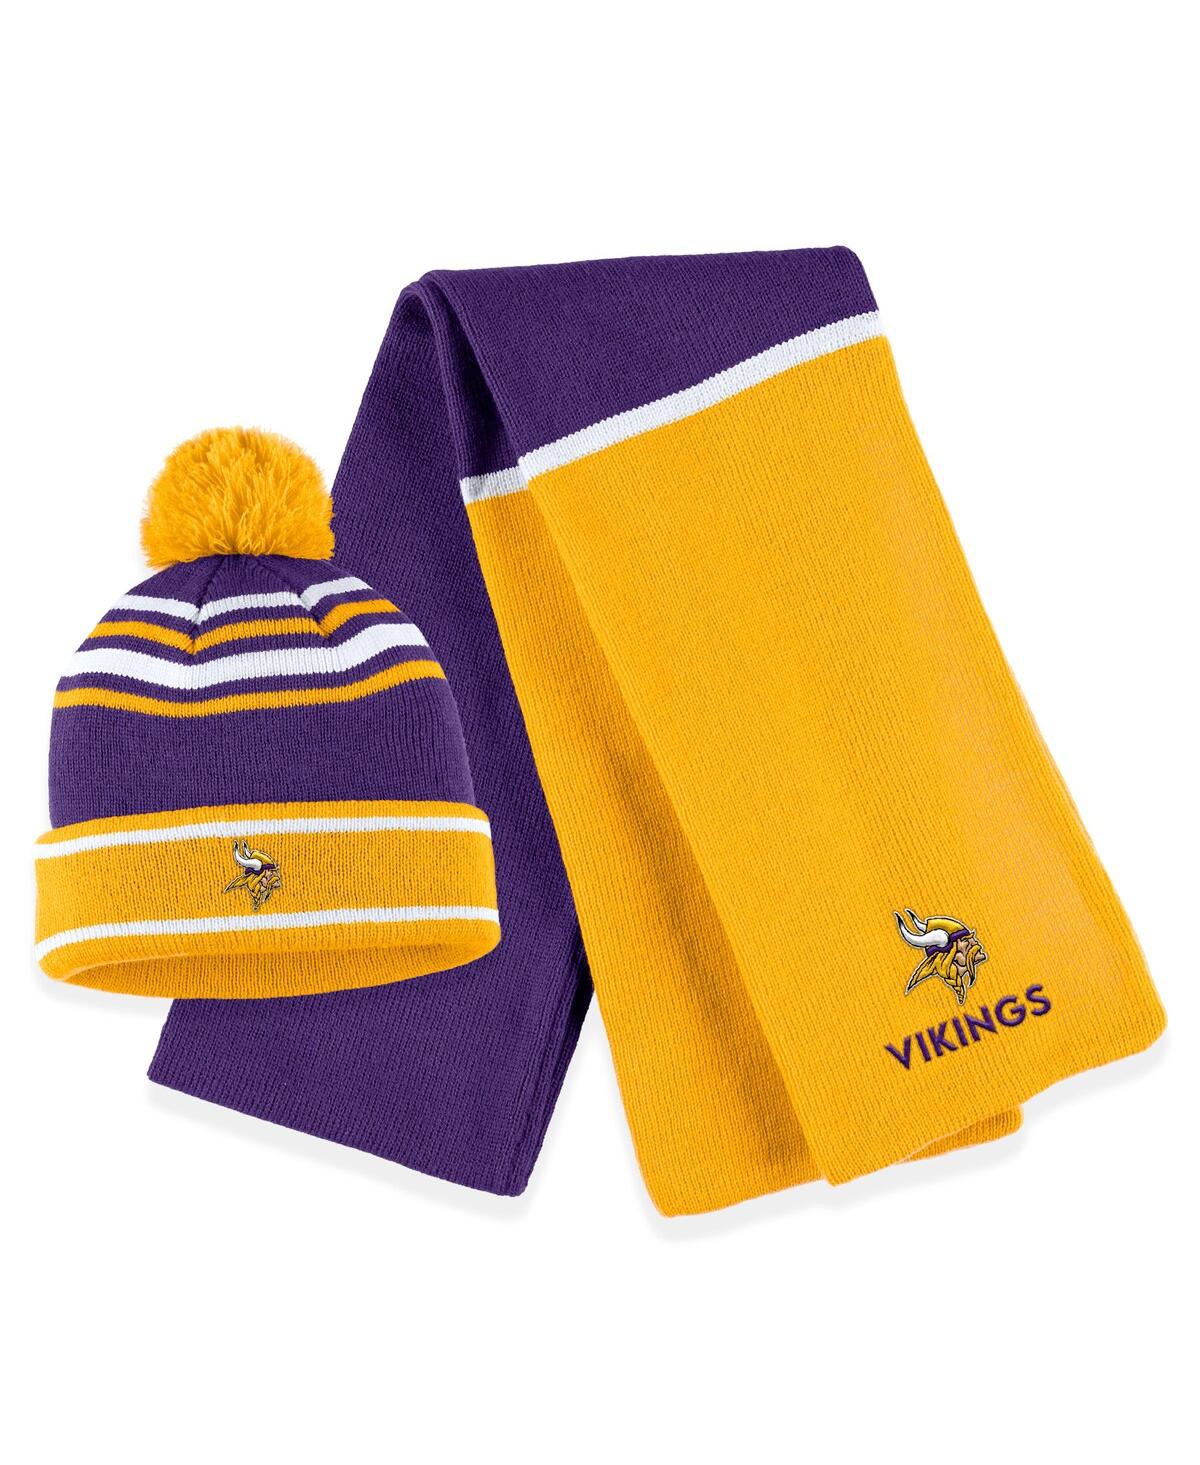 Shop Wear By Erin Andrews Women's  Purple Minnesota Vikings Colorblock Cuffed Knit Hat With Pom And Scarf